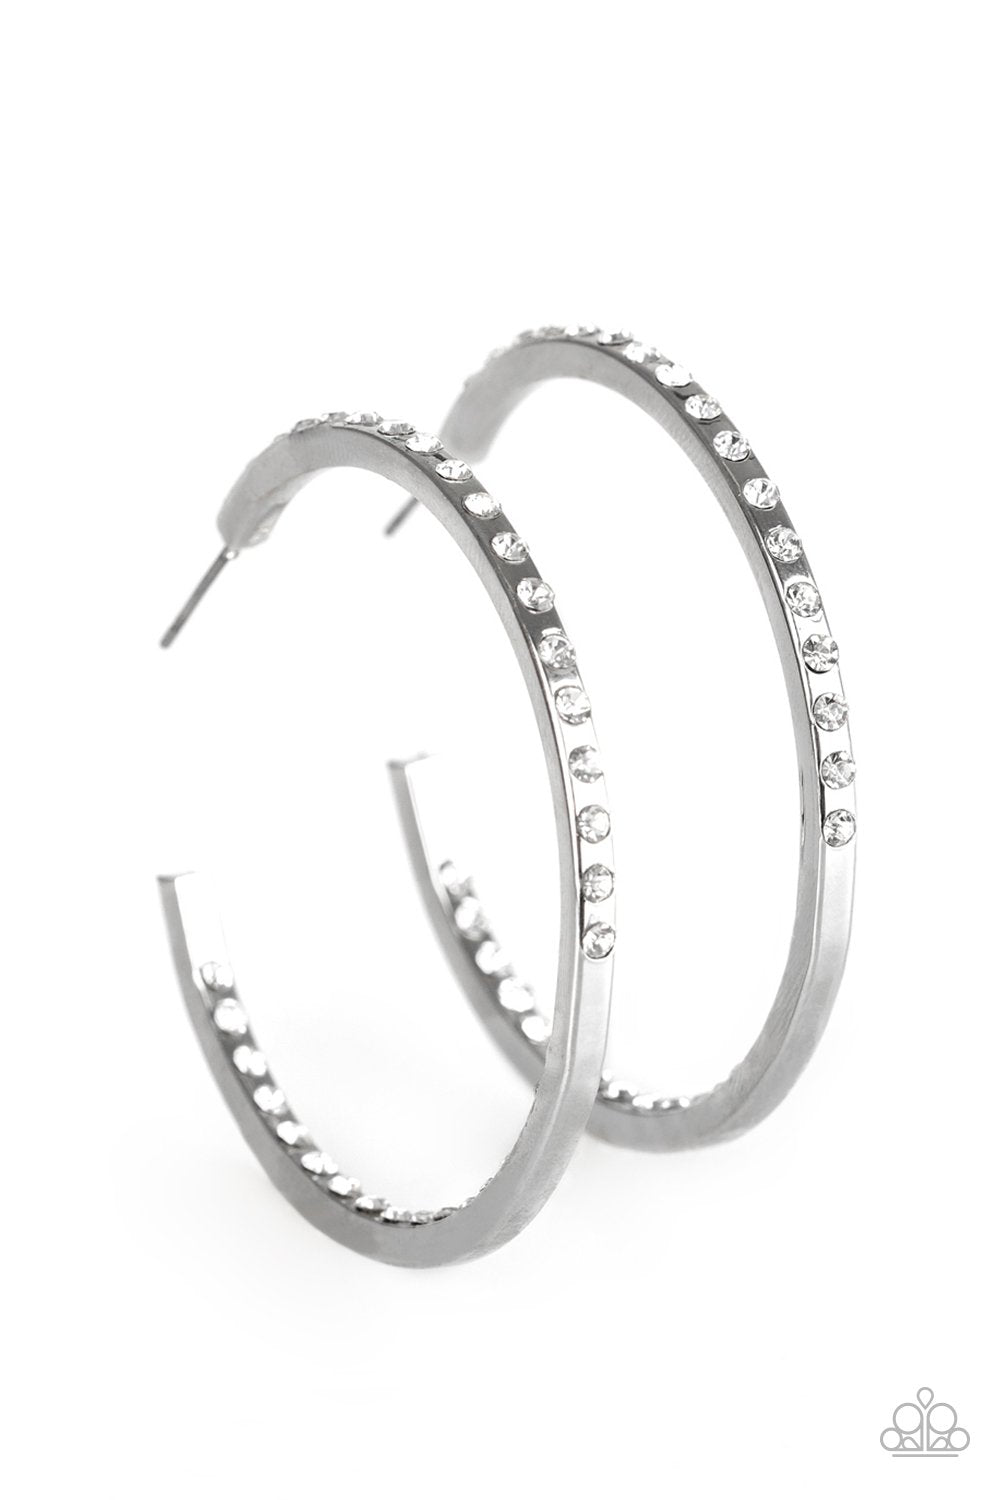 Coming Into Money Silver and White Rhinestone Hoop Earrings - Paparazzi Accessories-CarasShop.com - $5 Jewelry by Cara Jewels